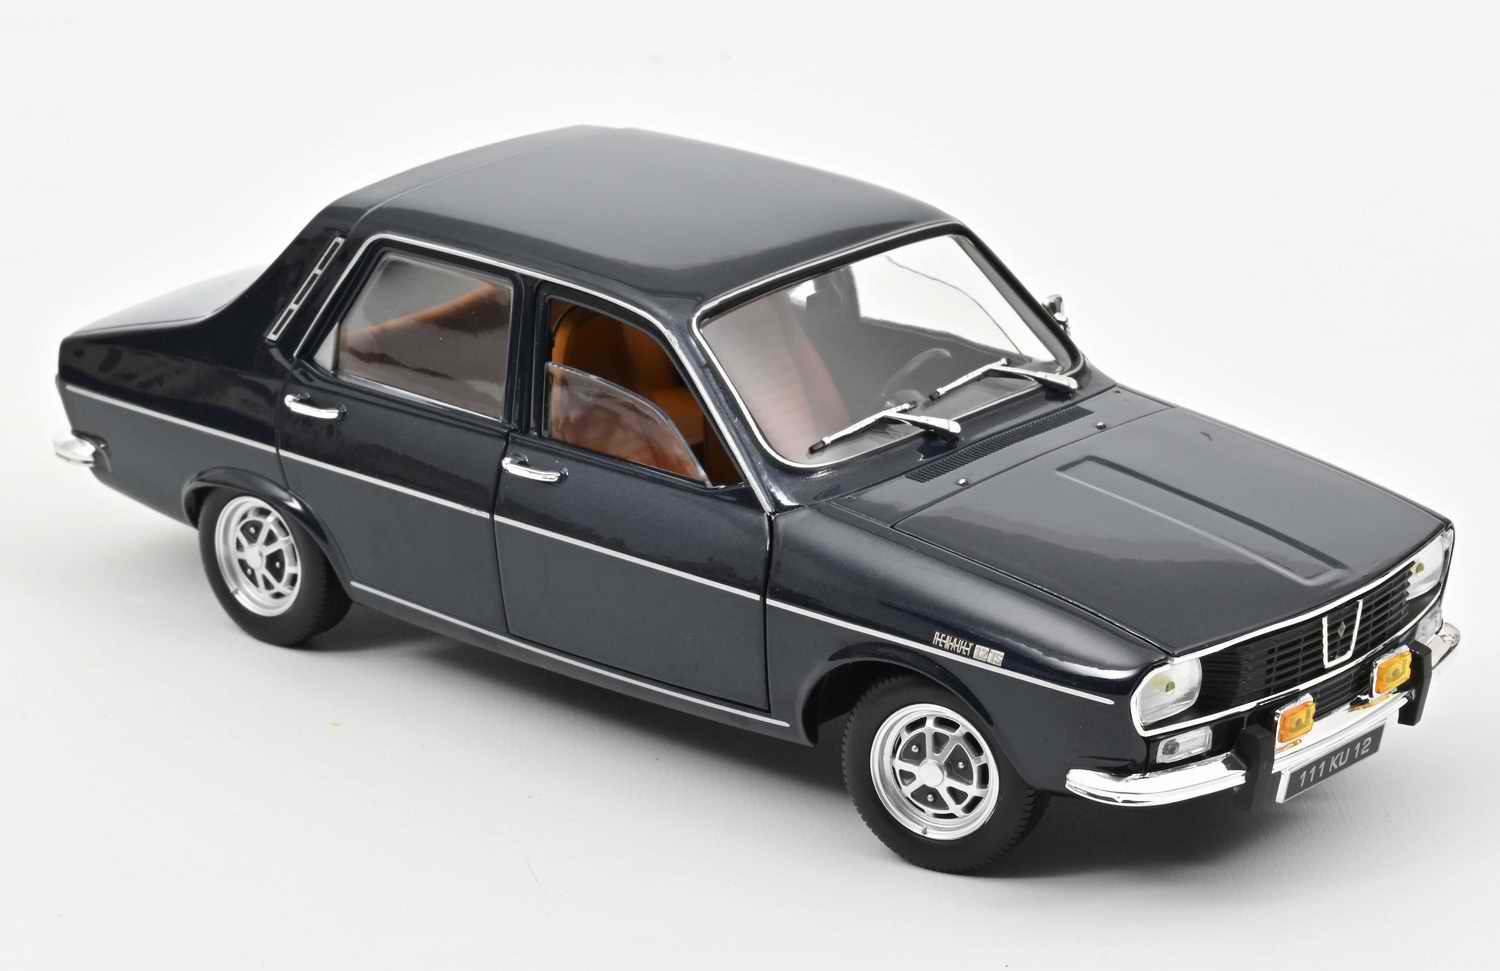 Voiture R12 Miniature RENAULT 12 TS Norev 1/18